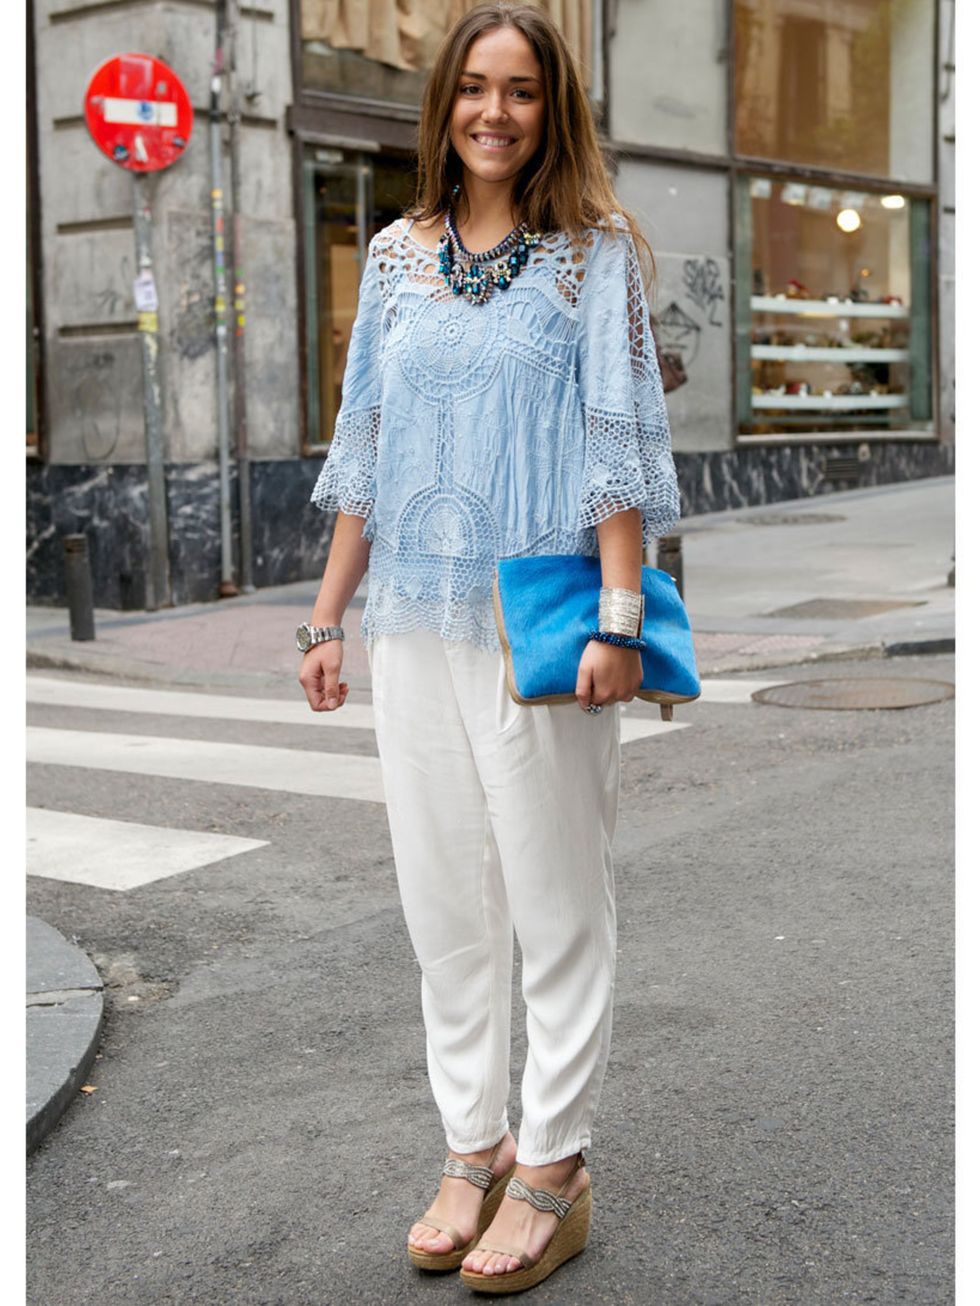 <p>Monica Gil is wearing an Adela Gil sweater, Pull and Bear jeans, Alma En Pena shoes, La Fille handbag and a Vanity Her necklace.</p>